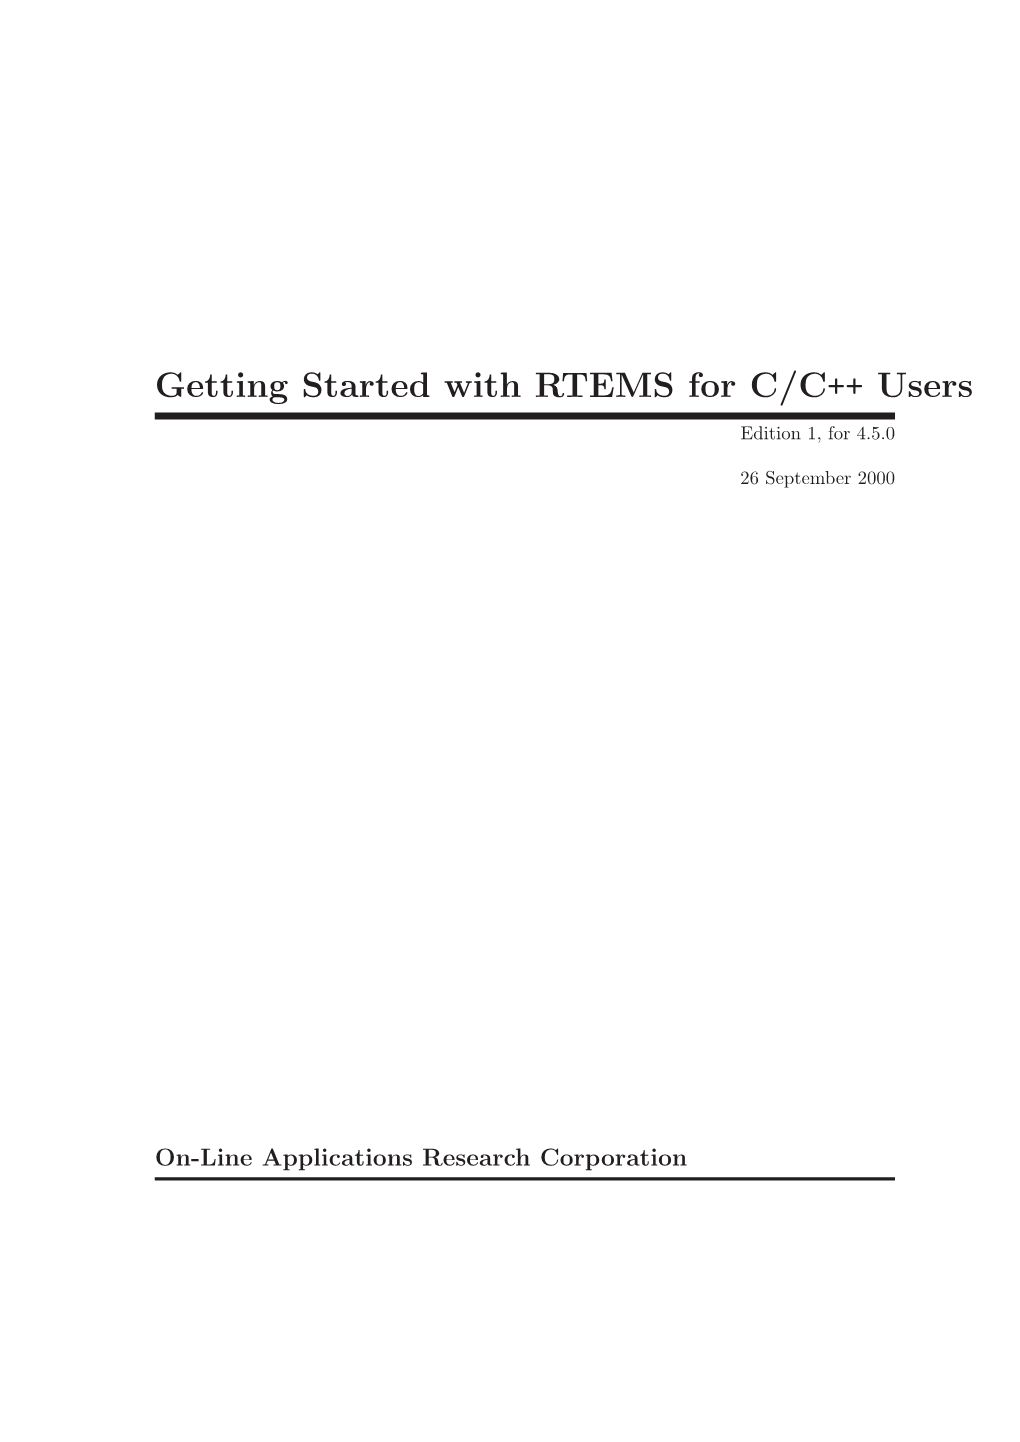 Getting Started with RTEMS for C/C++ Users